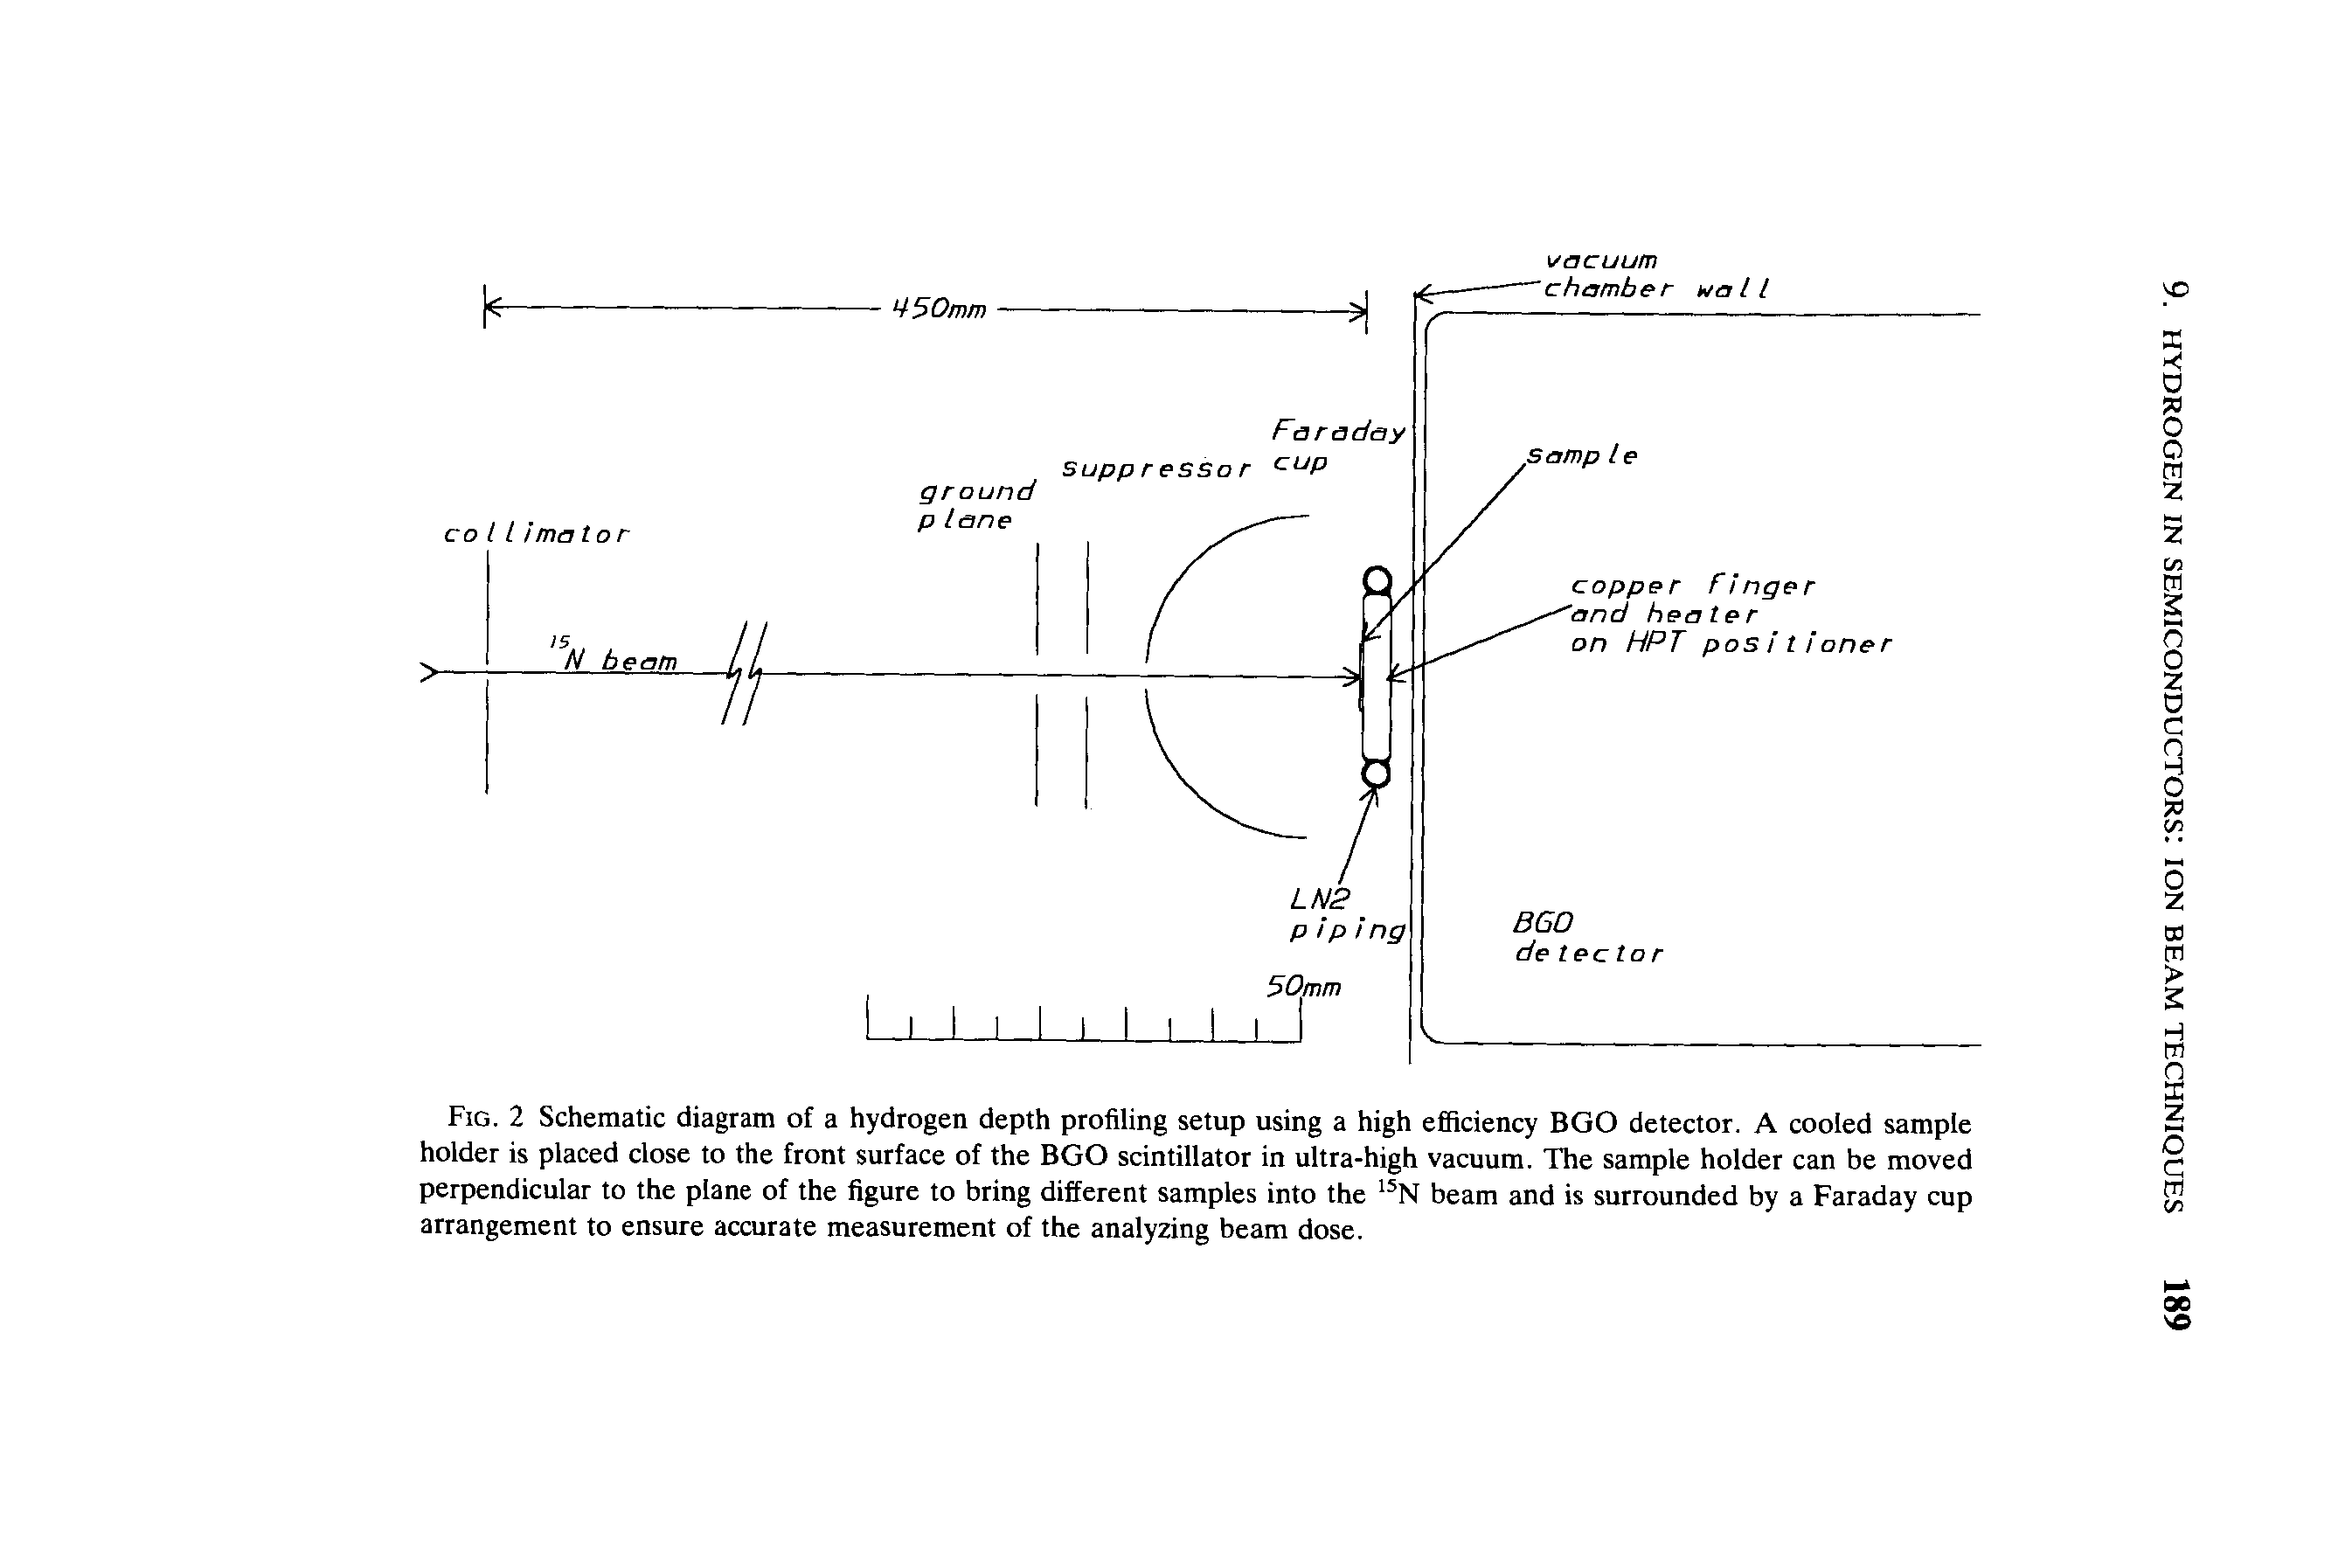 Fig. 2 Schematic diagram of a hydrogen depth profiling setup using a high efficiency BGO detector. A cooled sample holder is placed close to the front surface of the BGO scintillator in ultra-high vacuum. The sample holder can be moved perpendicular to the plane of the figure to bring different samples into the 15N beam and is surrounded by a Faraday cup arrangement to ensure accurate measurement of the analyzing beam dose.